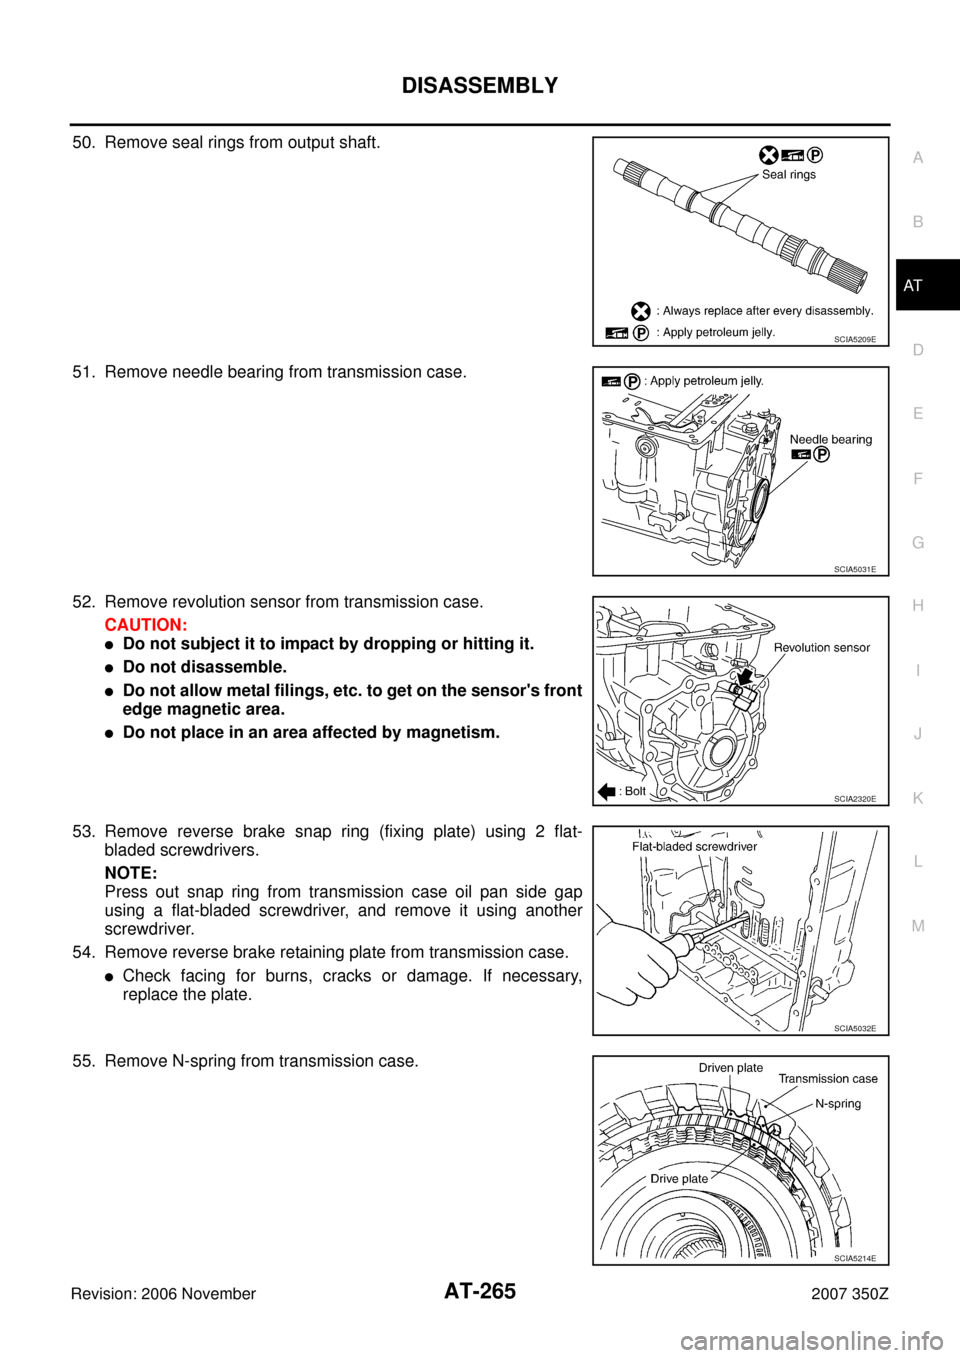 NISSAN 350Z 2007 Z33 Automatic Transmission Owners Manual DISASSEMBLY
AT-265
D
E
F
G
H
I
J
K
L
MA
B
AT
Revision: 2006 November2007 350Z
50. Remove seal rings from output shaft.
51. Remove needle bearing from transmission case.
52. Remove revolution sensor fr